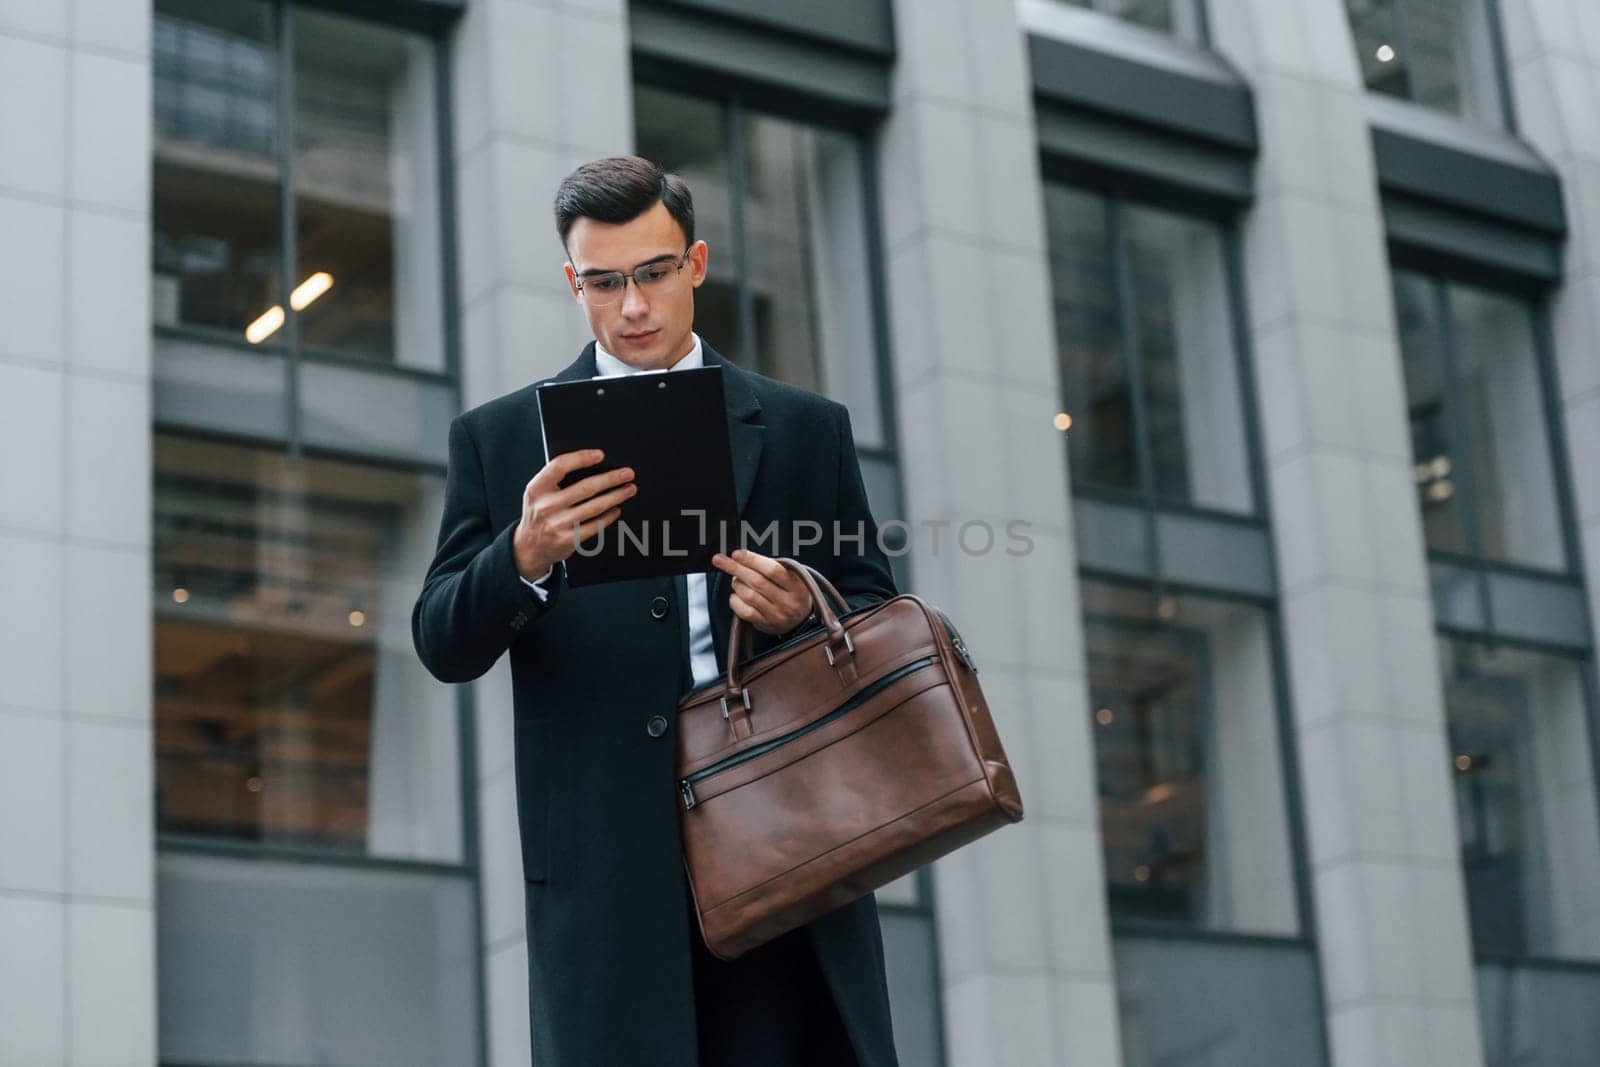 With brown bag. Businessman in black suit and tie is outdoors in the city by Standret